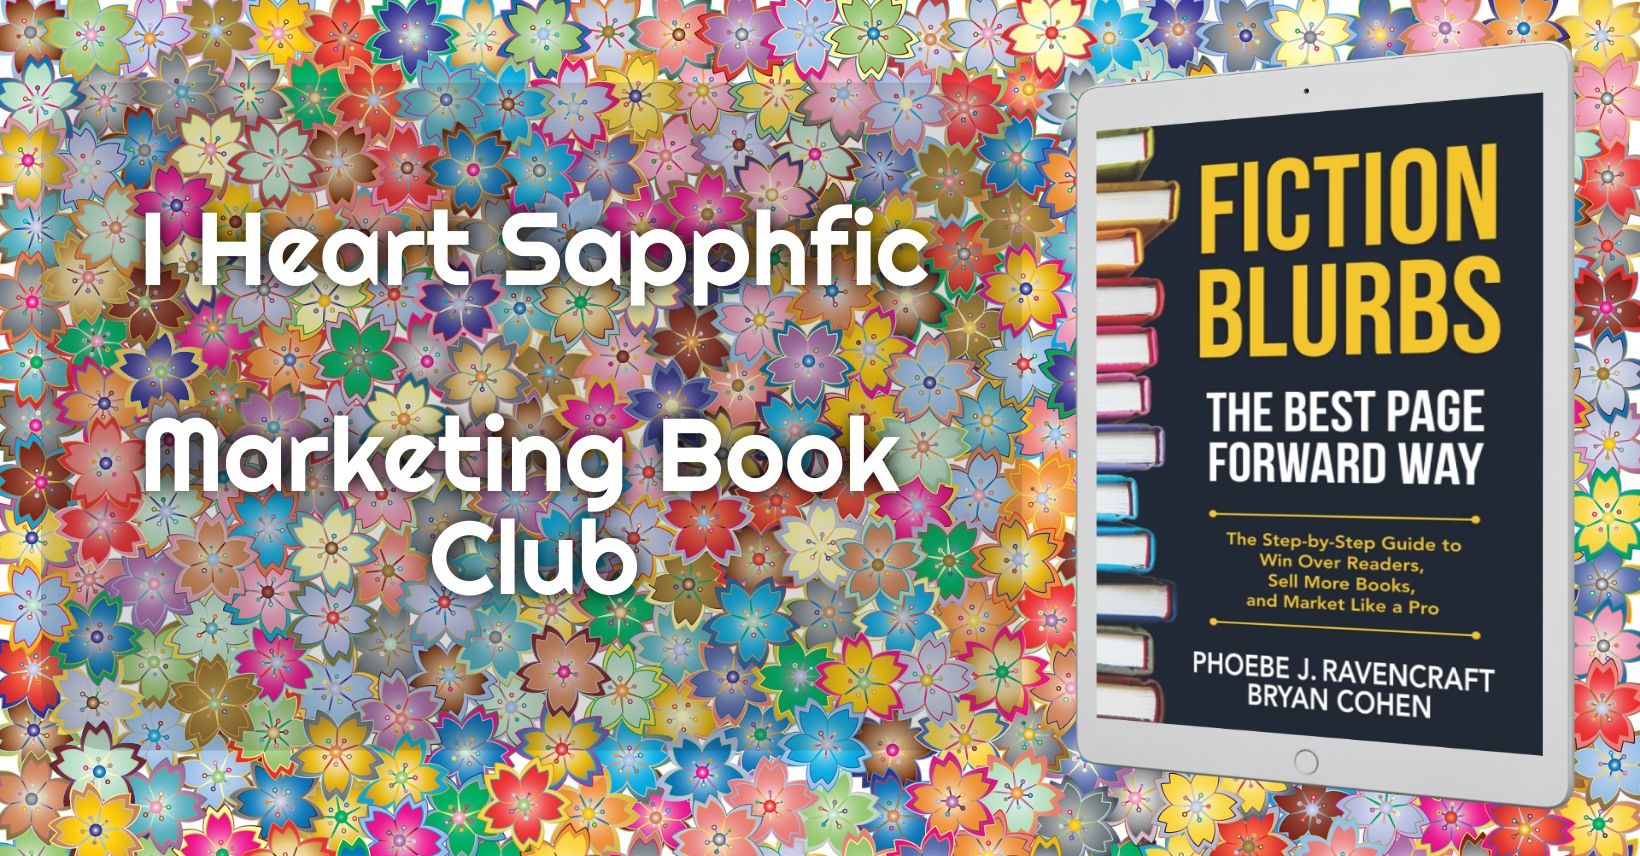 I Heart Sapphfic Marketing Book Club: Fiction Blurbs by Ravencraft and Cohen